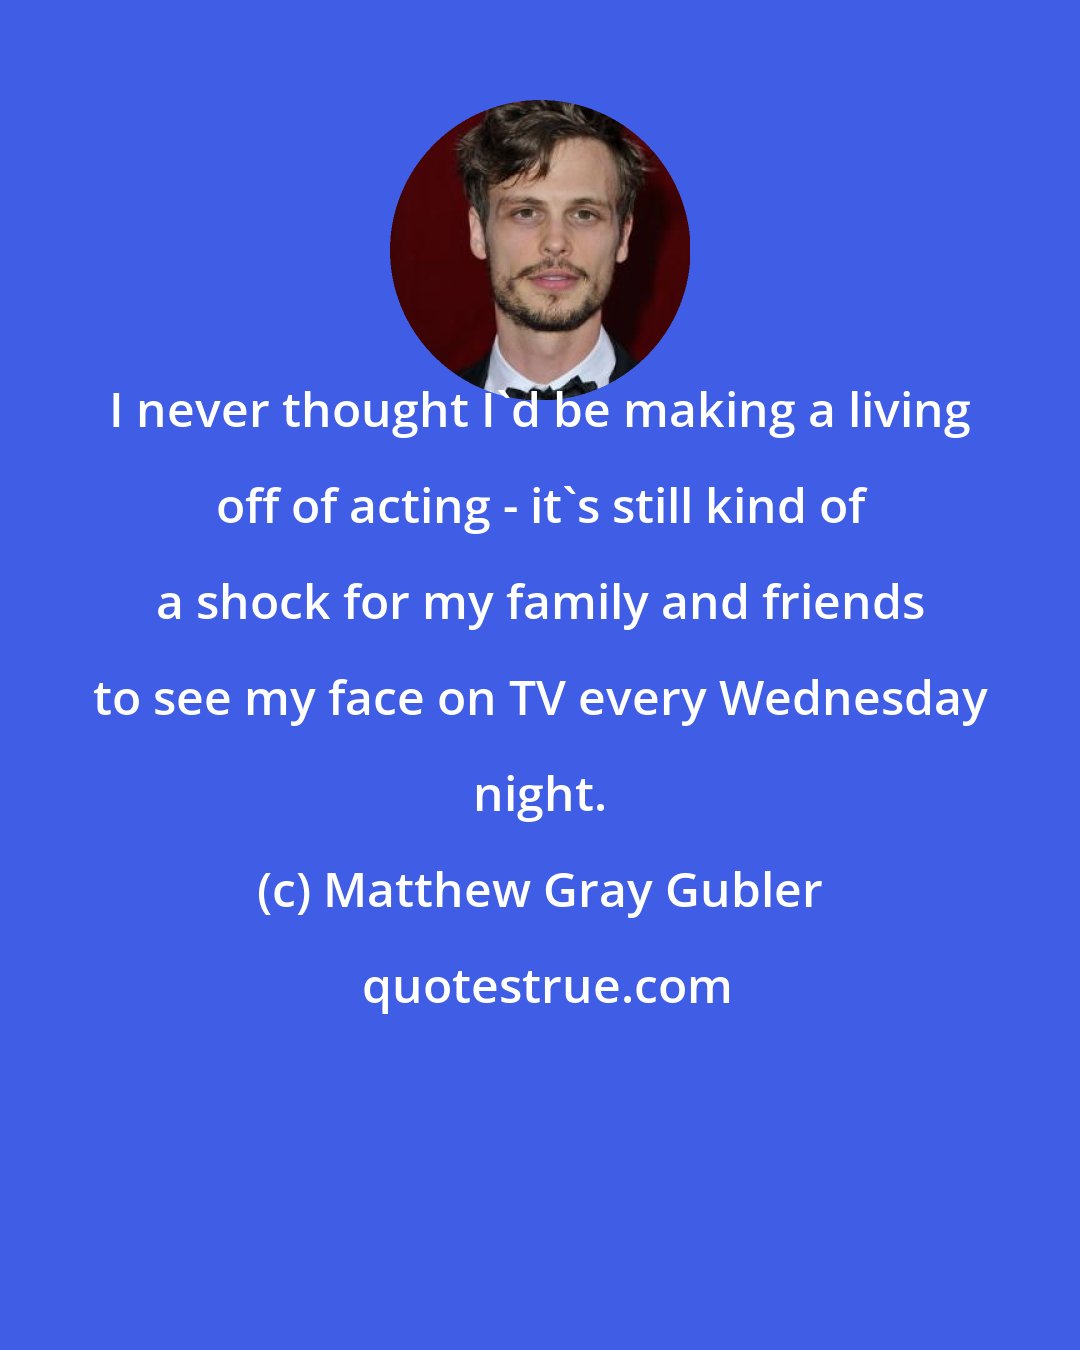 Matthew Gray Gubler: I never thought I'd be making a living off of acting - it's still kind of a shock for my family and friends to see my face on TV every Wednesday night.